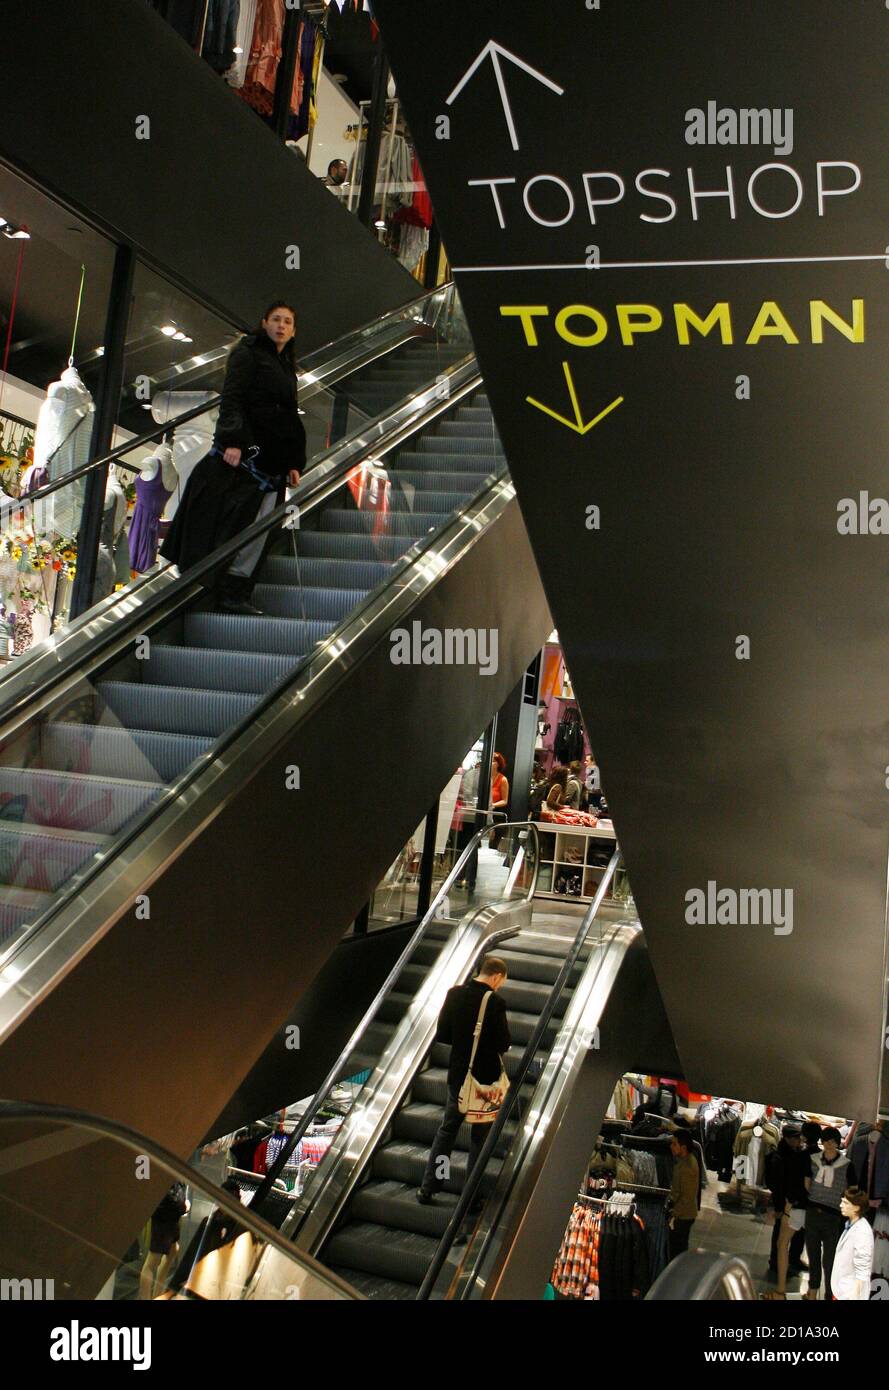 Shoppers ride on escalators in the new Topshop and Topman clothing store in  New York April 2, 2009. Topshop, Britain's trendy mass-market fashion  retailer, could eventually have about 15 stores in the